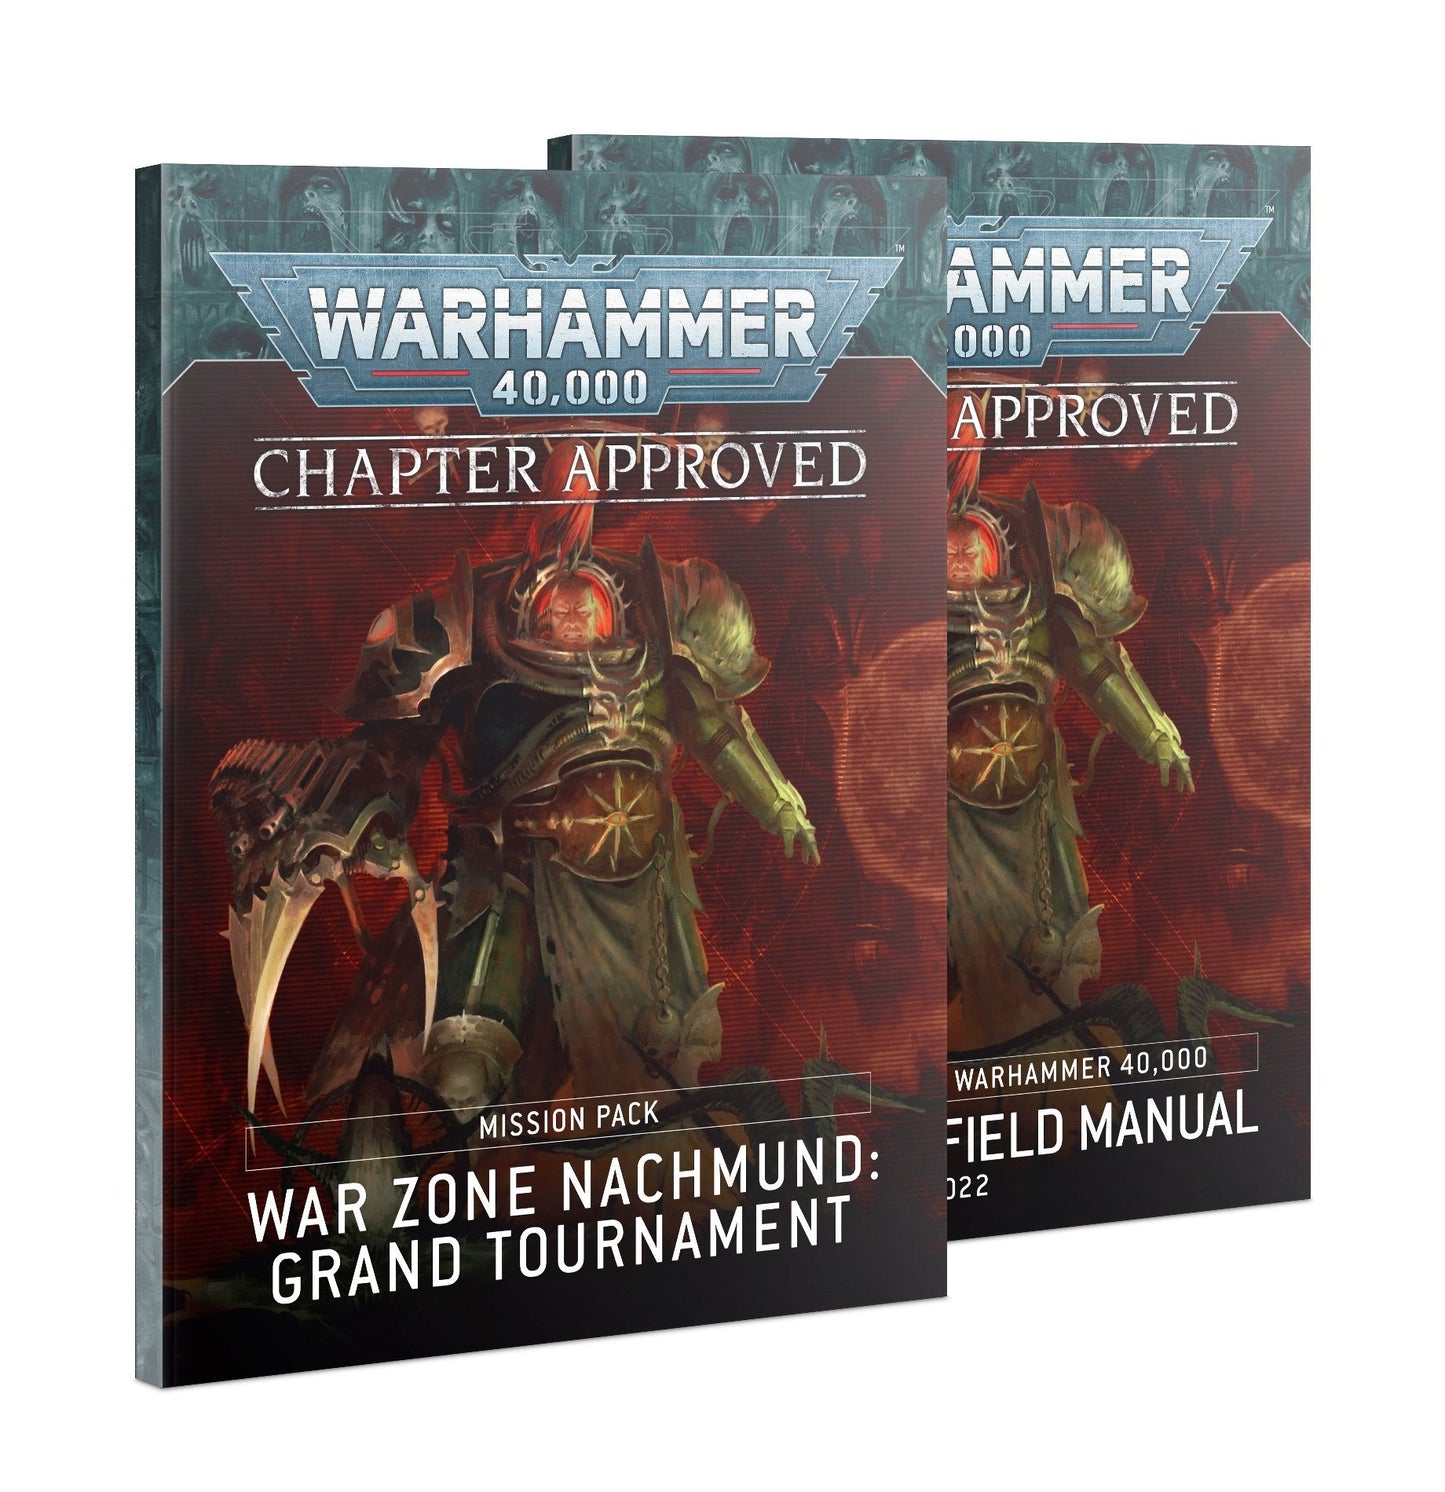 Chapter Approved: War Zone Nachmund Grand Tournament Mission Pack and Munitorum Field Manual 2022 - Gamescape